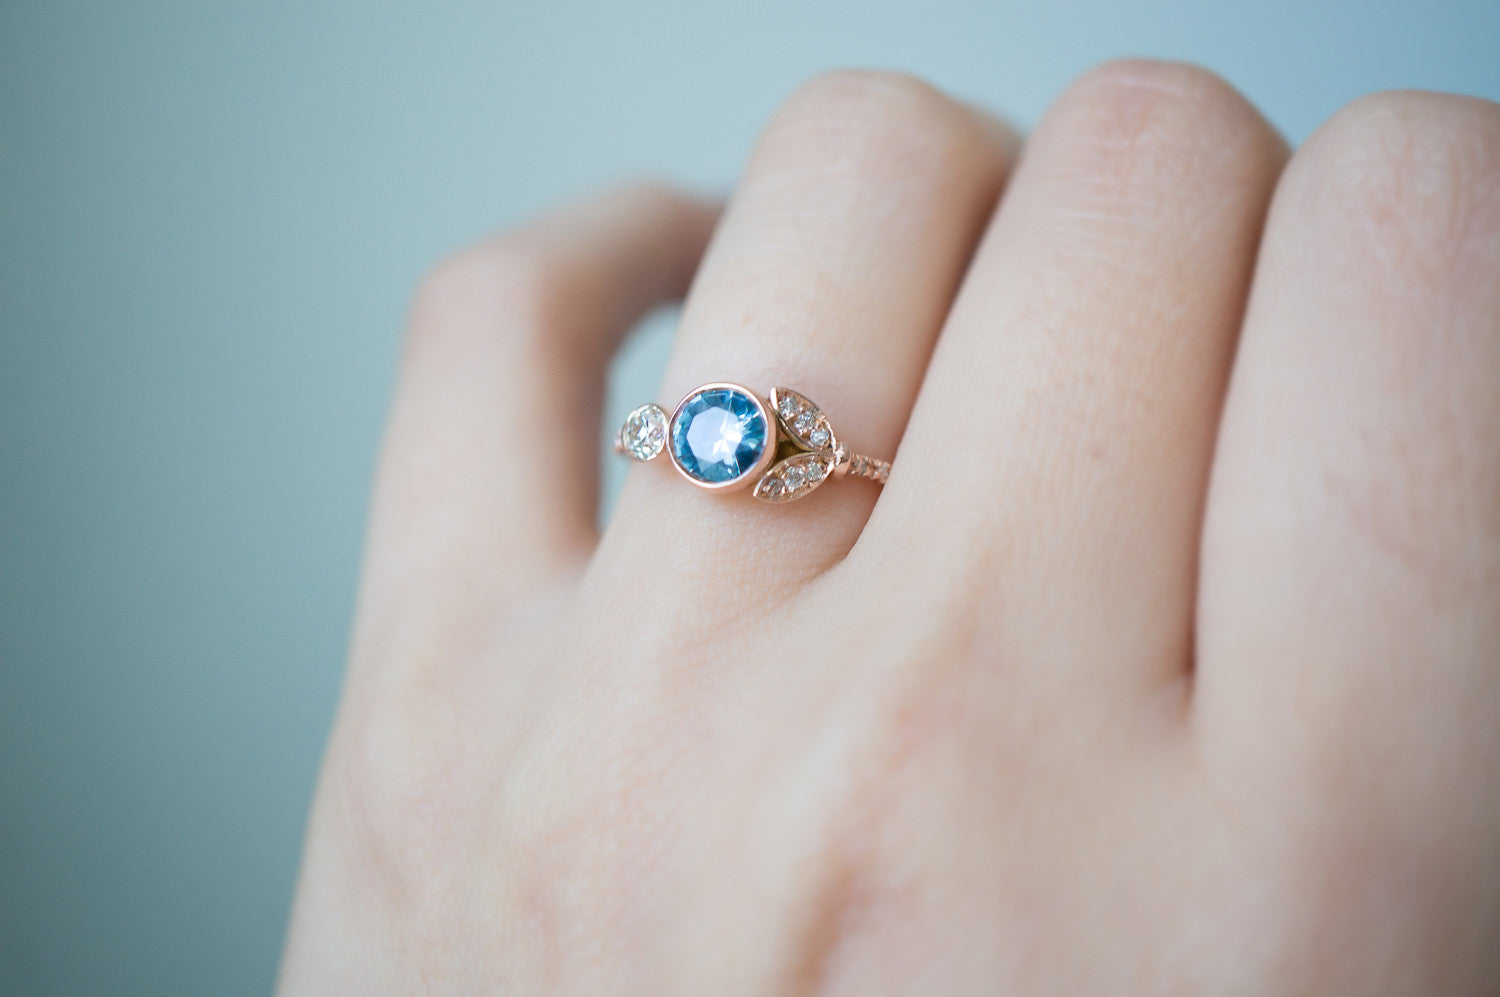 Lunette Sapphire and Vintage Diamond Engagement Ring - S. Kind & Co